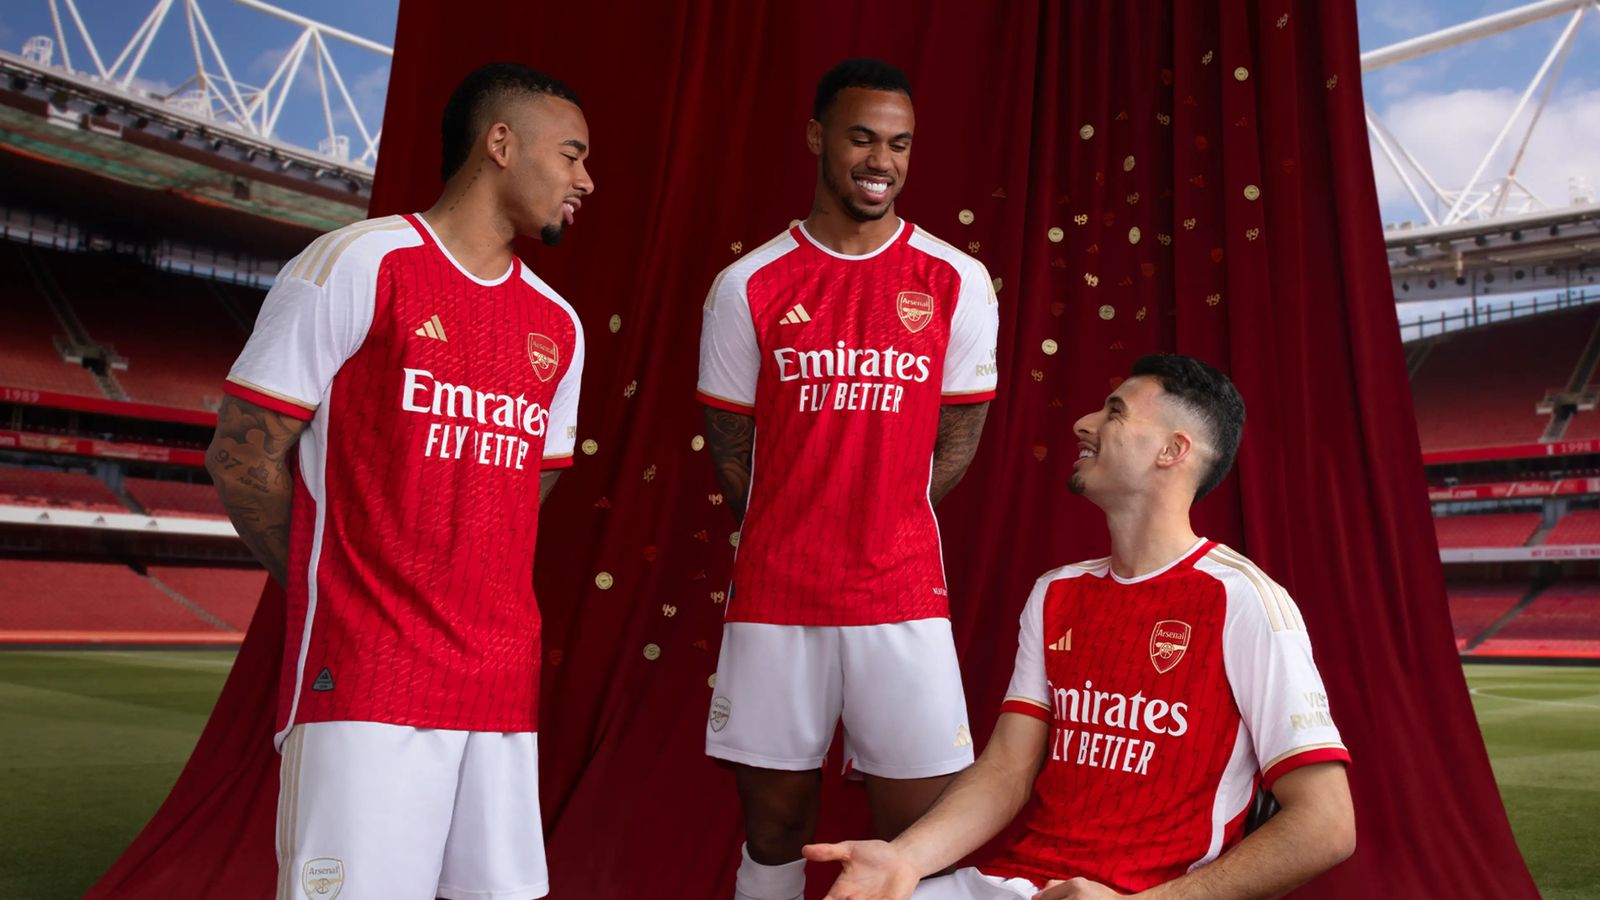 Arsenal adidas Home Kit product image of Jesus, Gabriel, and Martinelli wearing red and white kits with golden details.